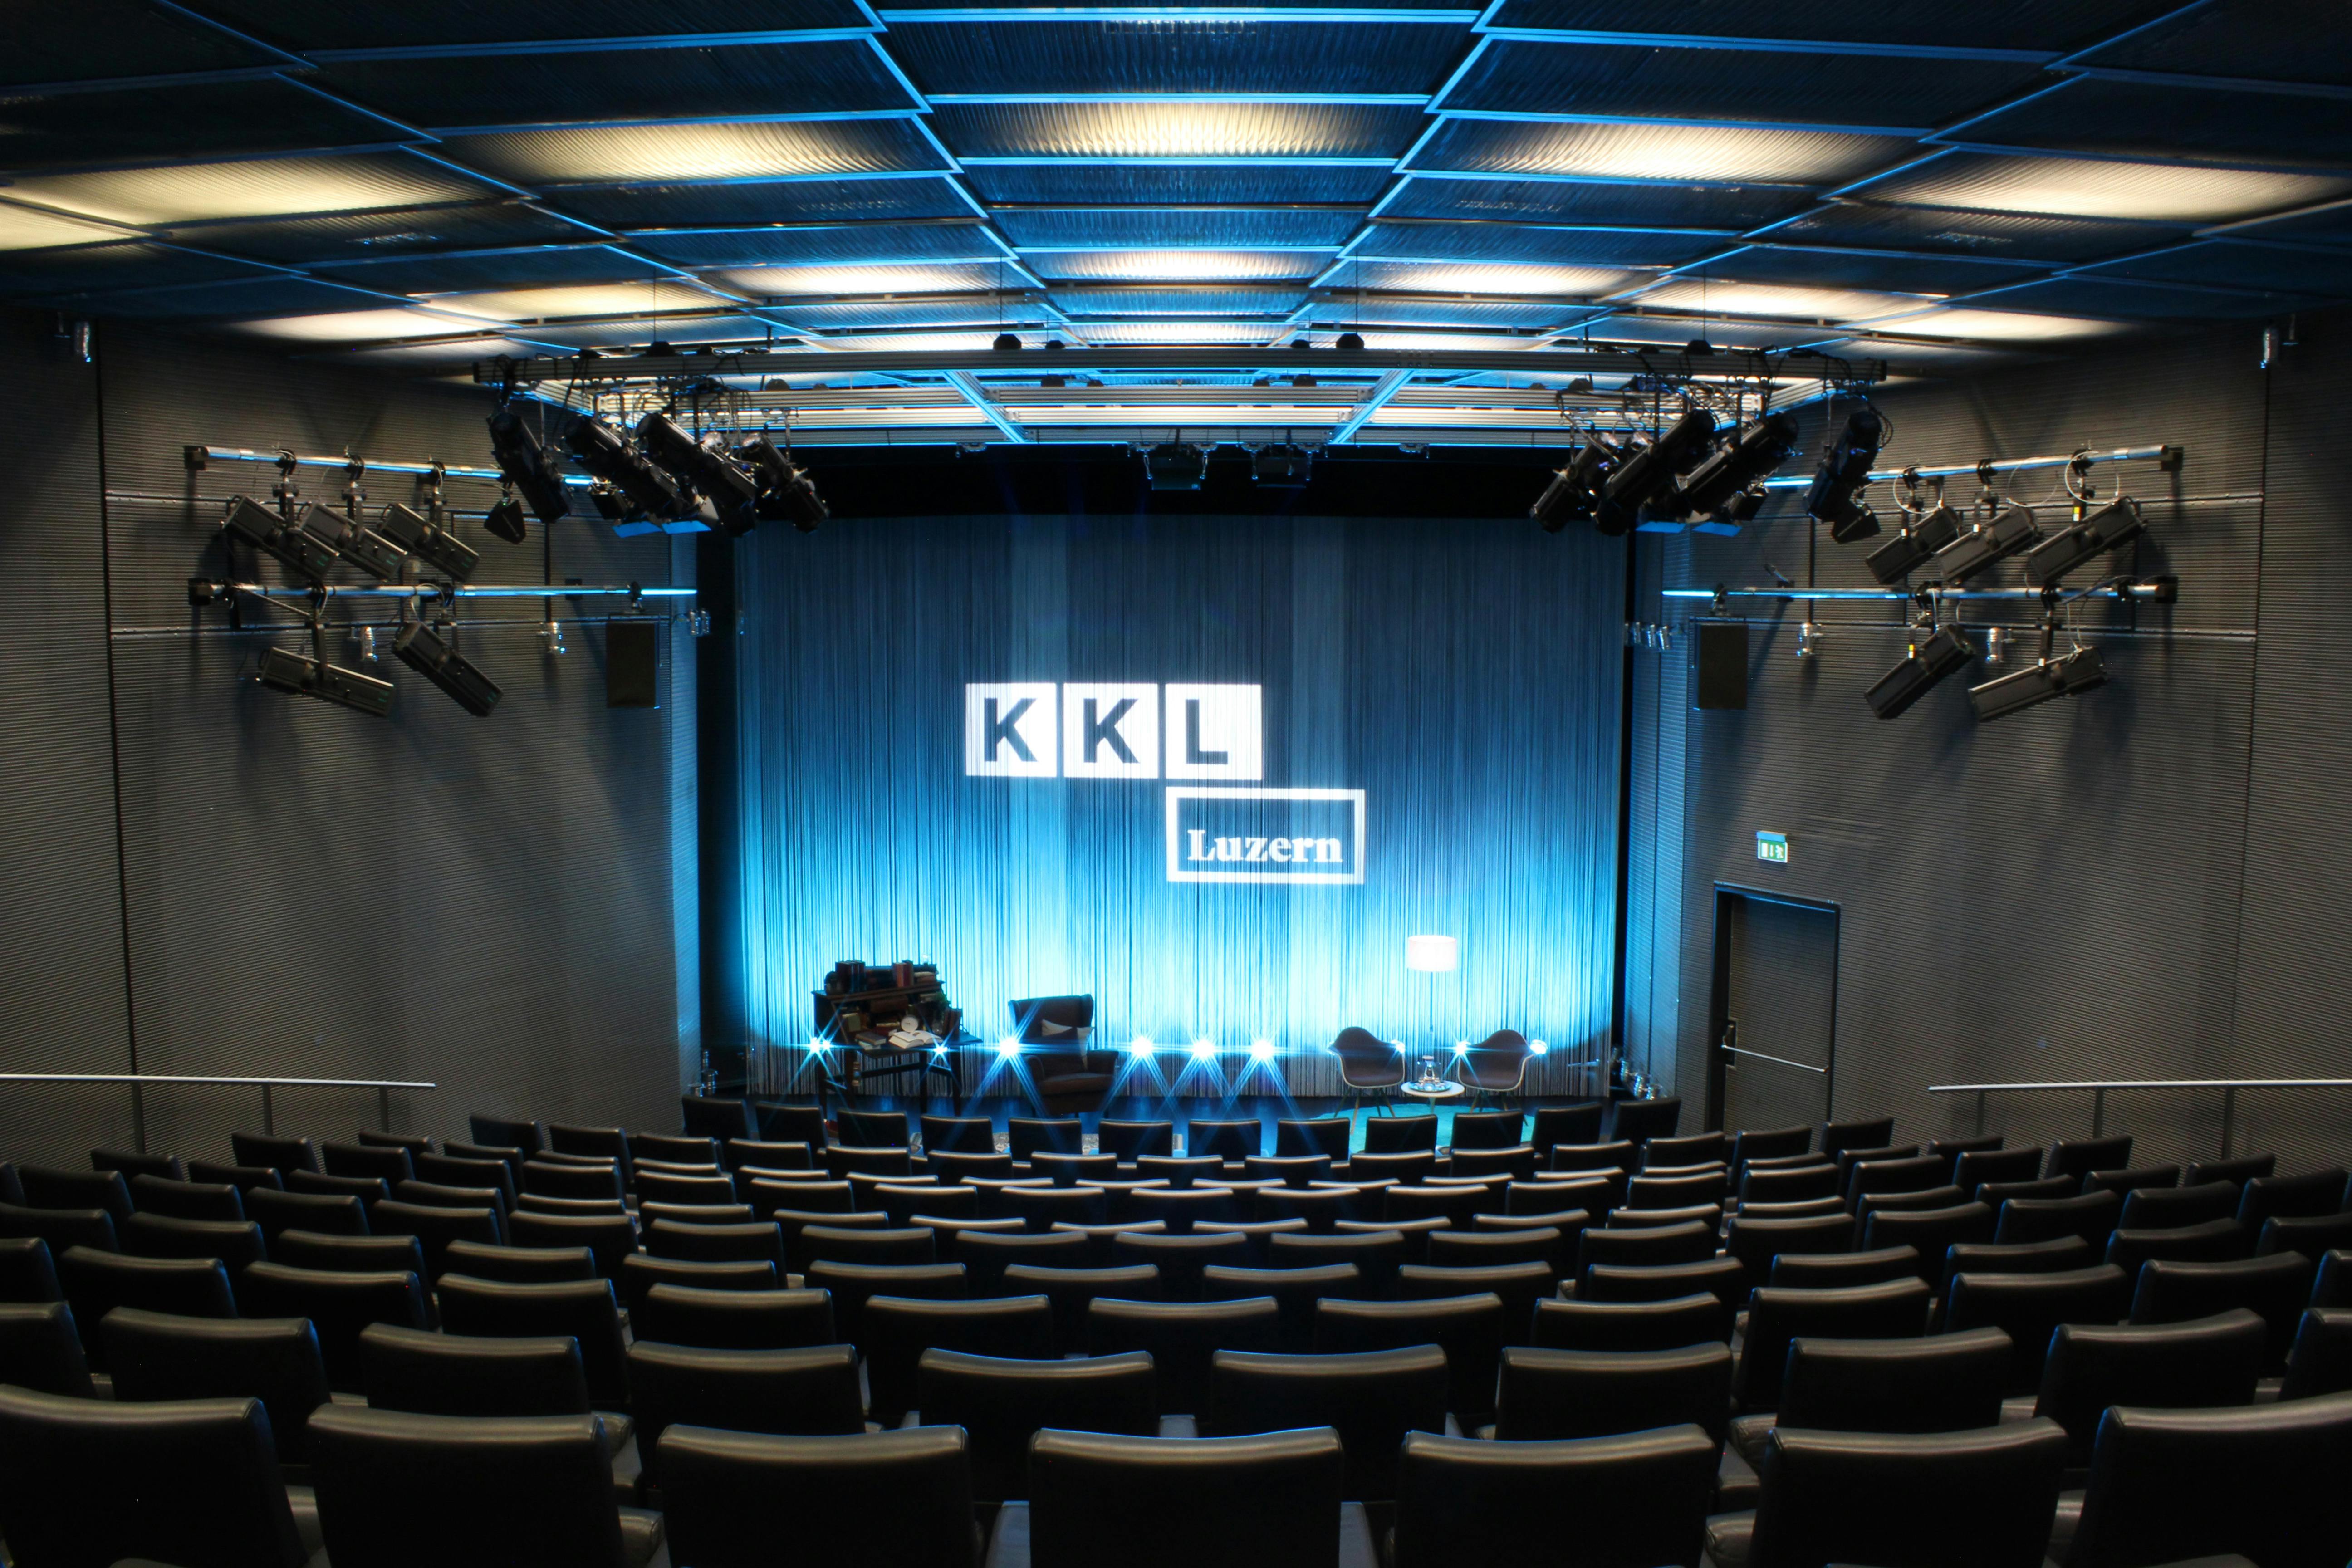 Auditorium in KKL Luzern with thread curtain and chairs for the reading